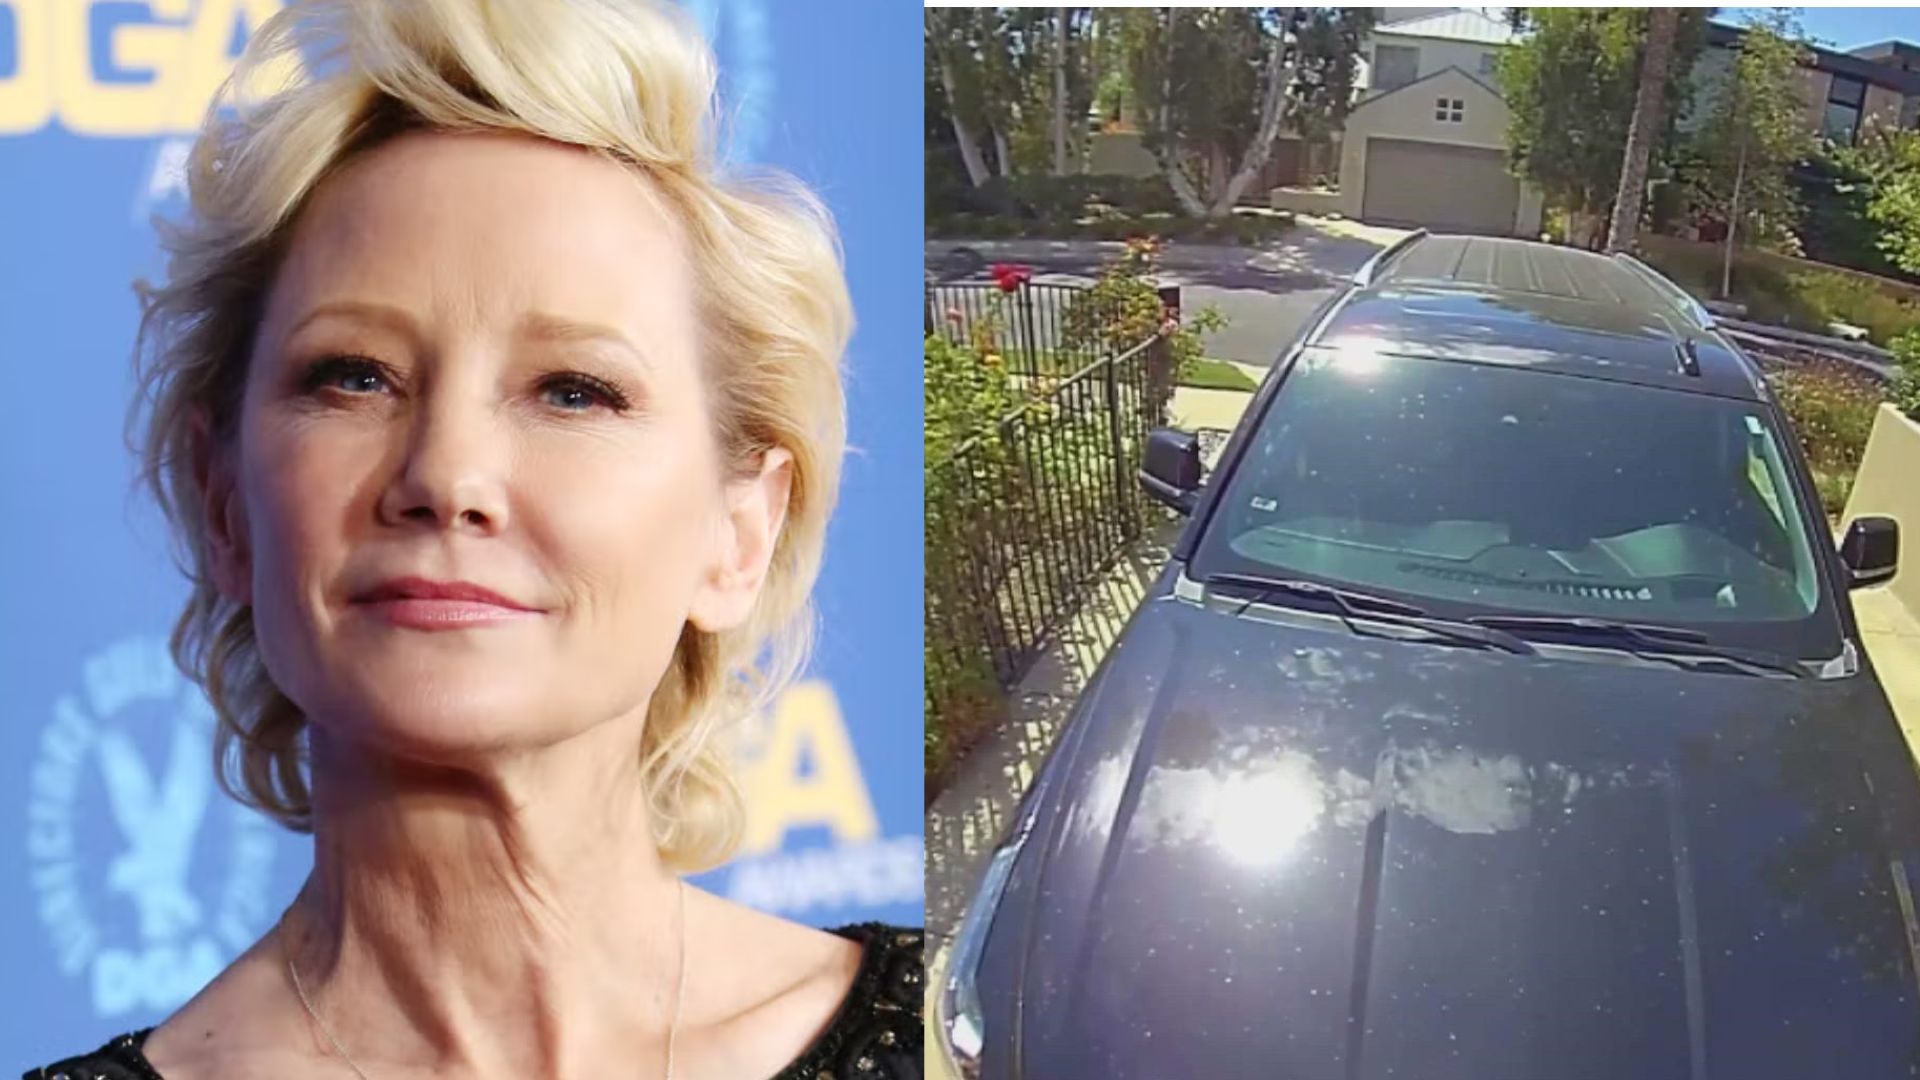 Files show that Anne Heche was trapped in a burning home for 45 minutes ...